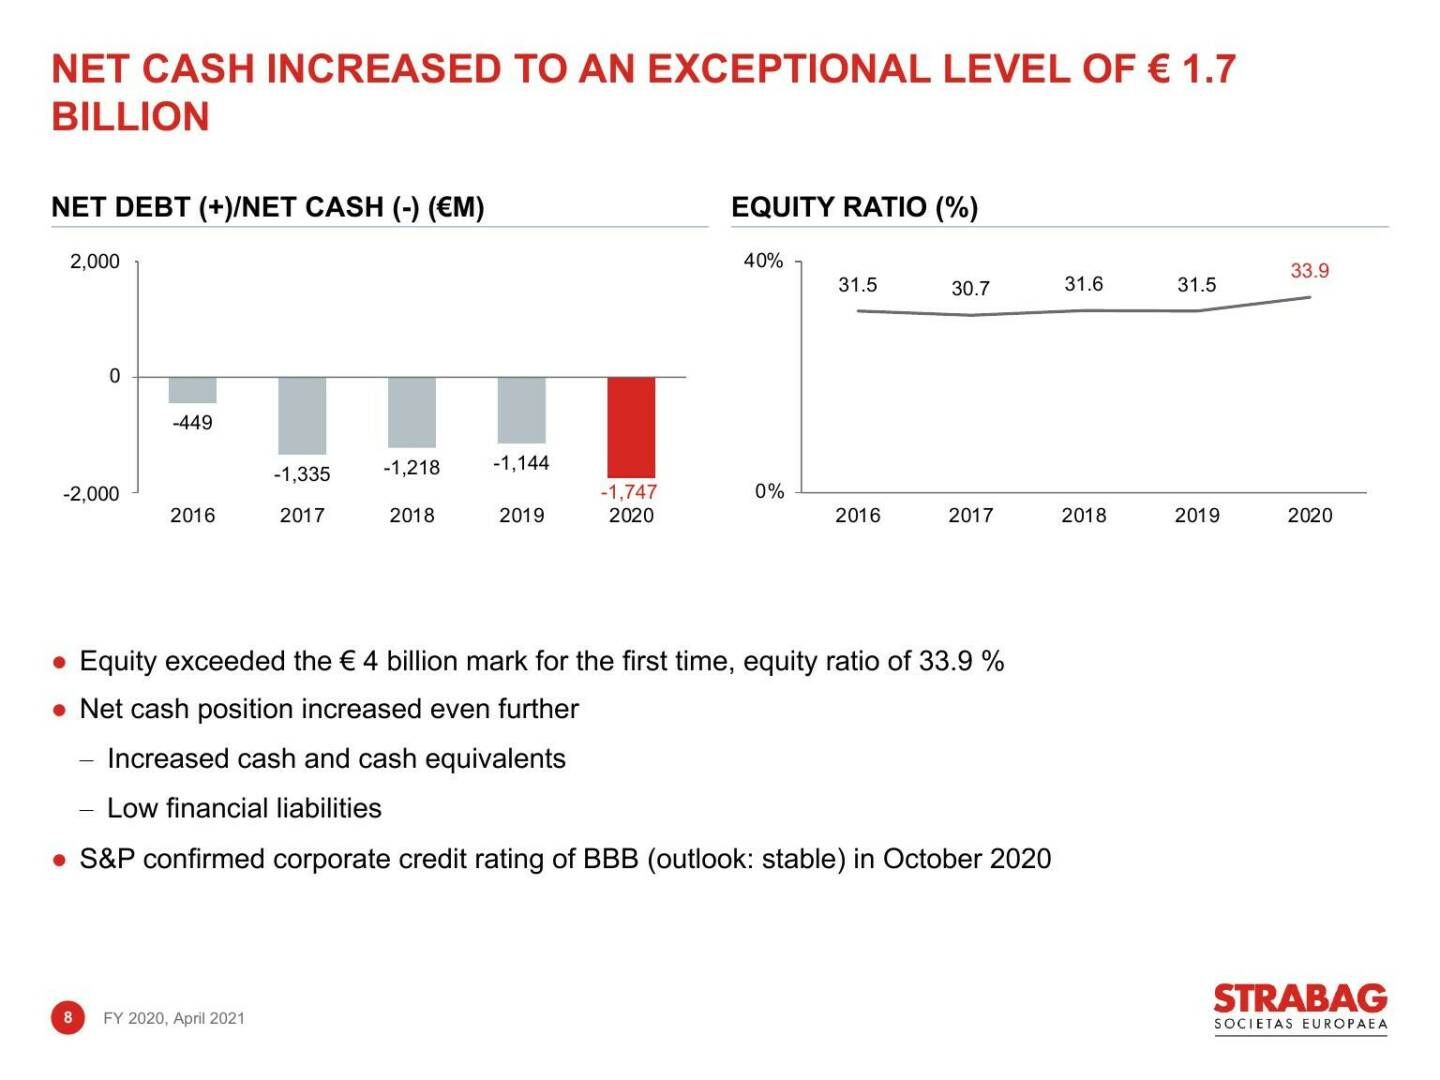 Strabag - Net cash increased to an exceptional level of € 1.7 billion